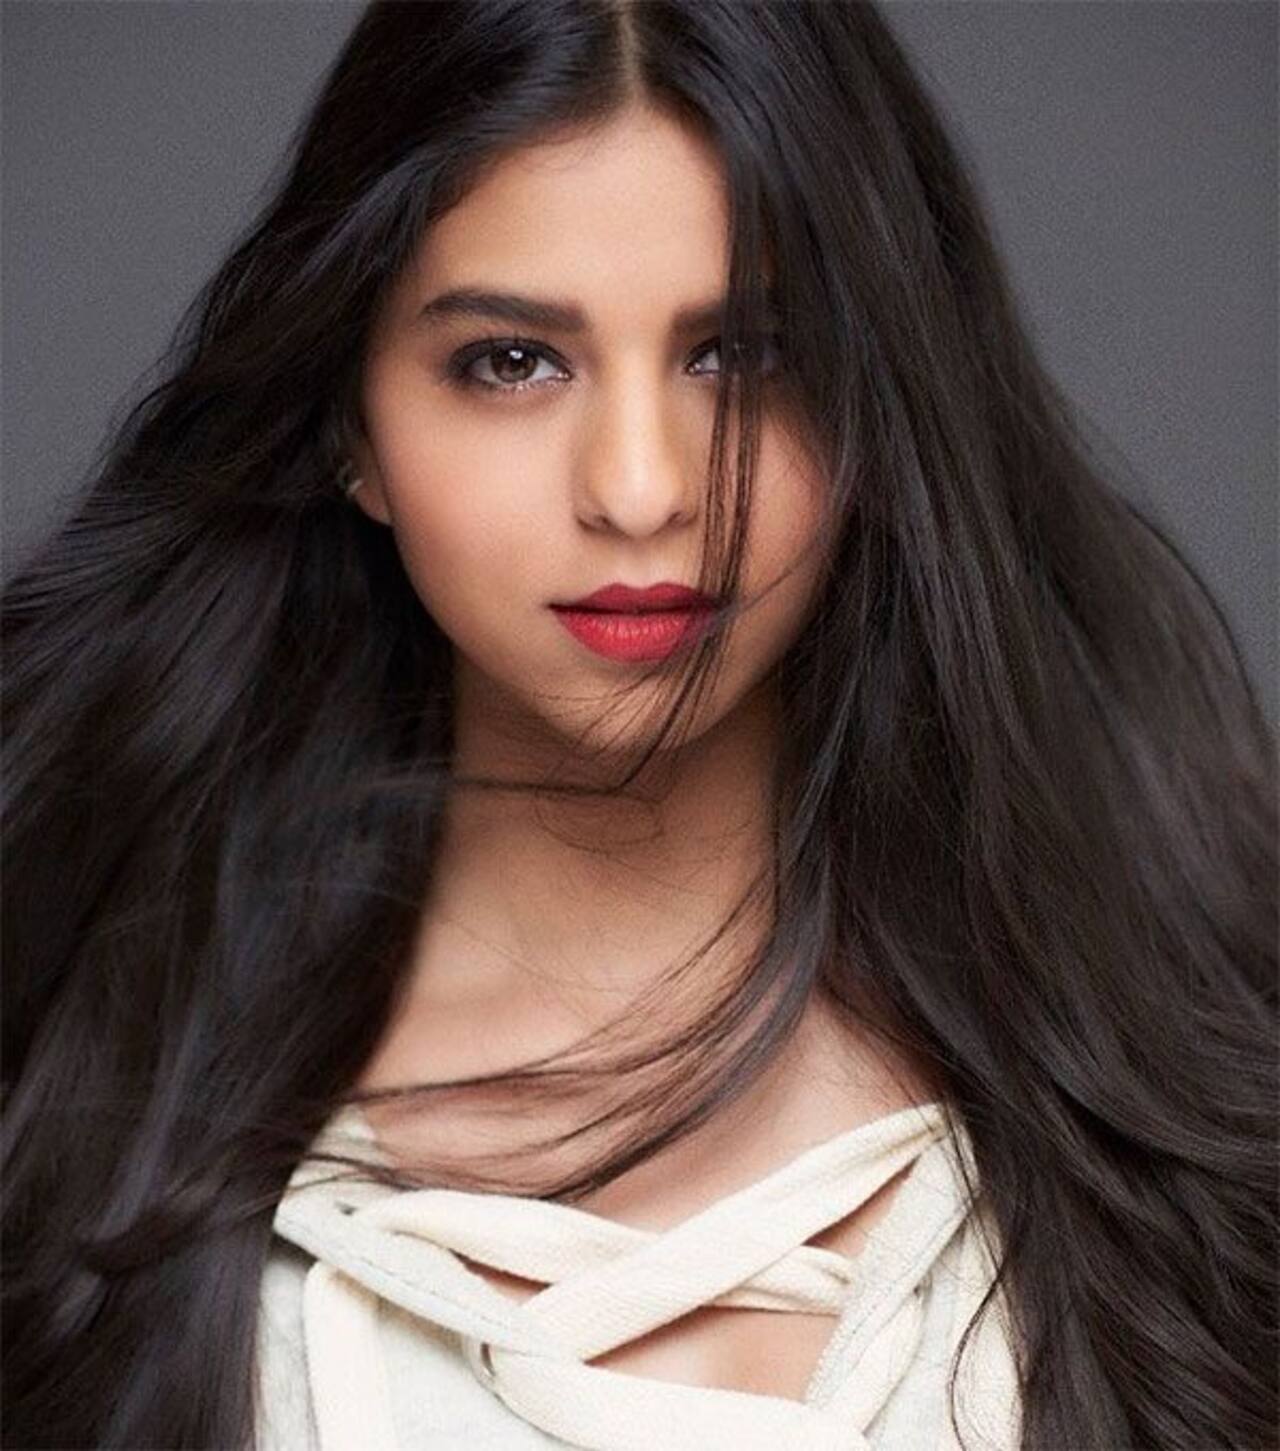 Suhana Khan is gearing up for her 18th birthday and this picture proves how gorgeous she will look